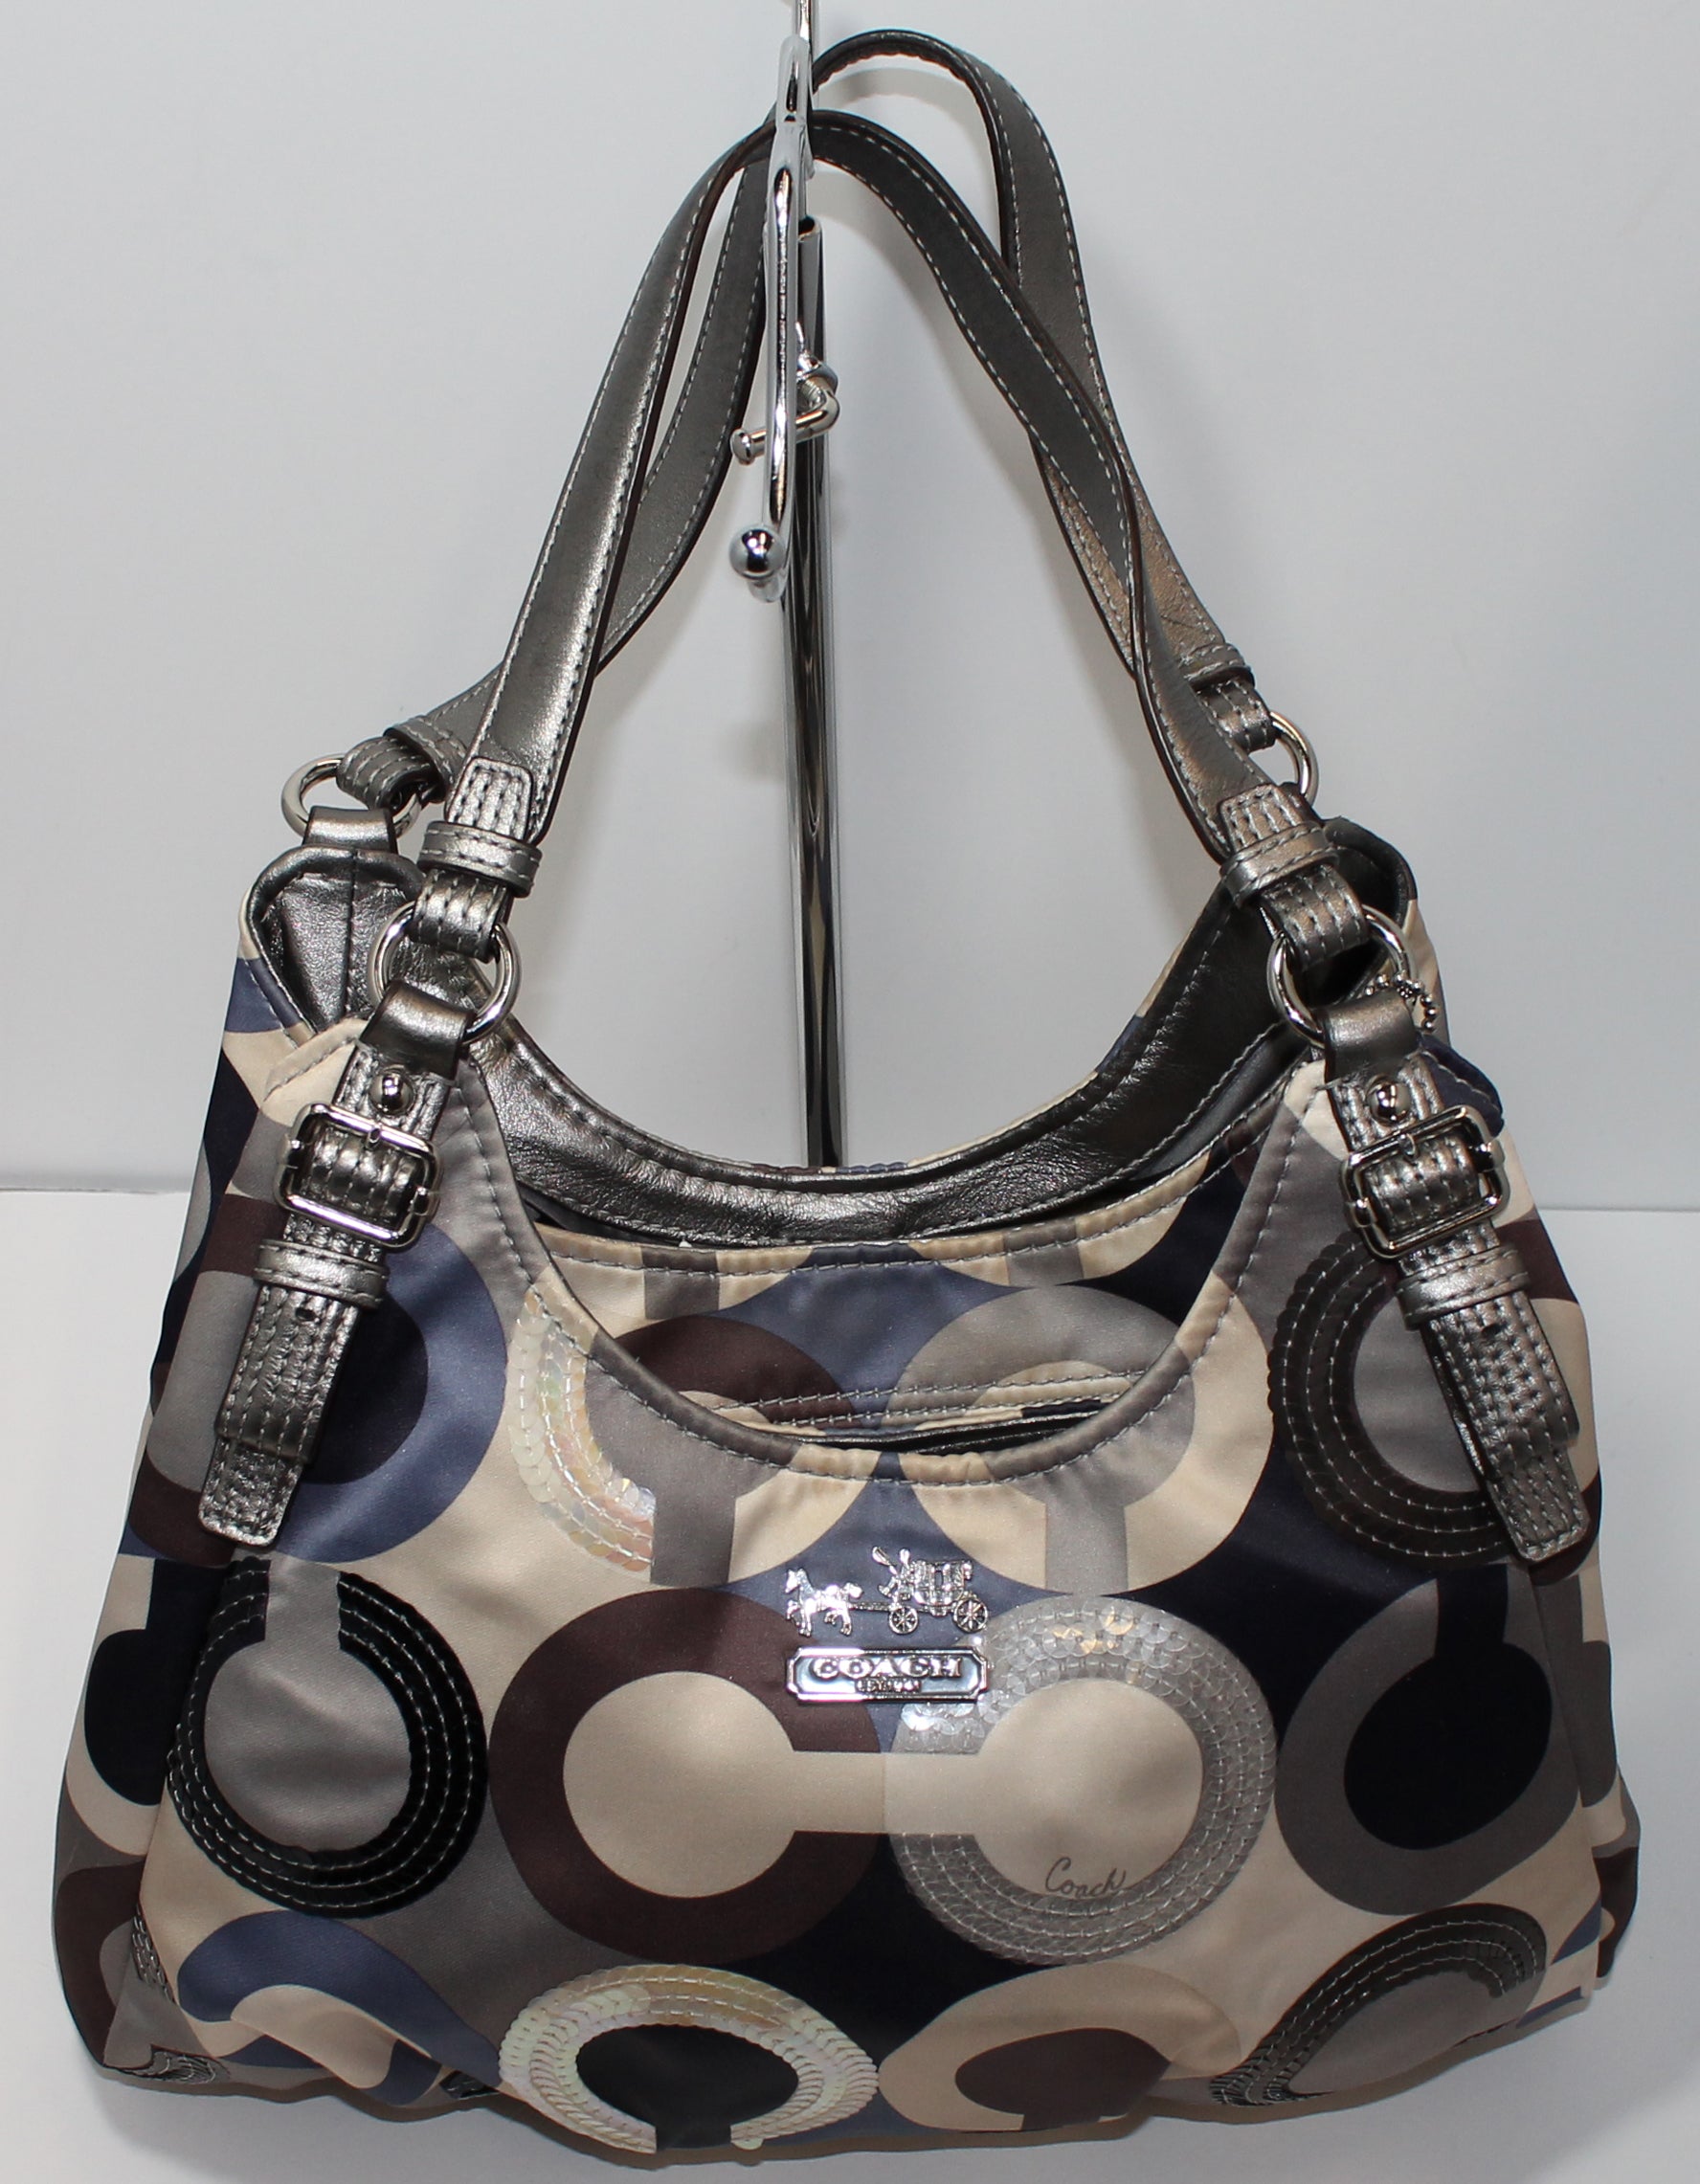 Coach - Authenticated Madison Handbag - Patent Leather Multicolour for Women, Good Condition